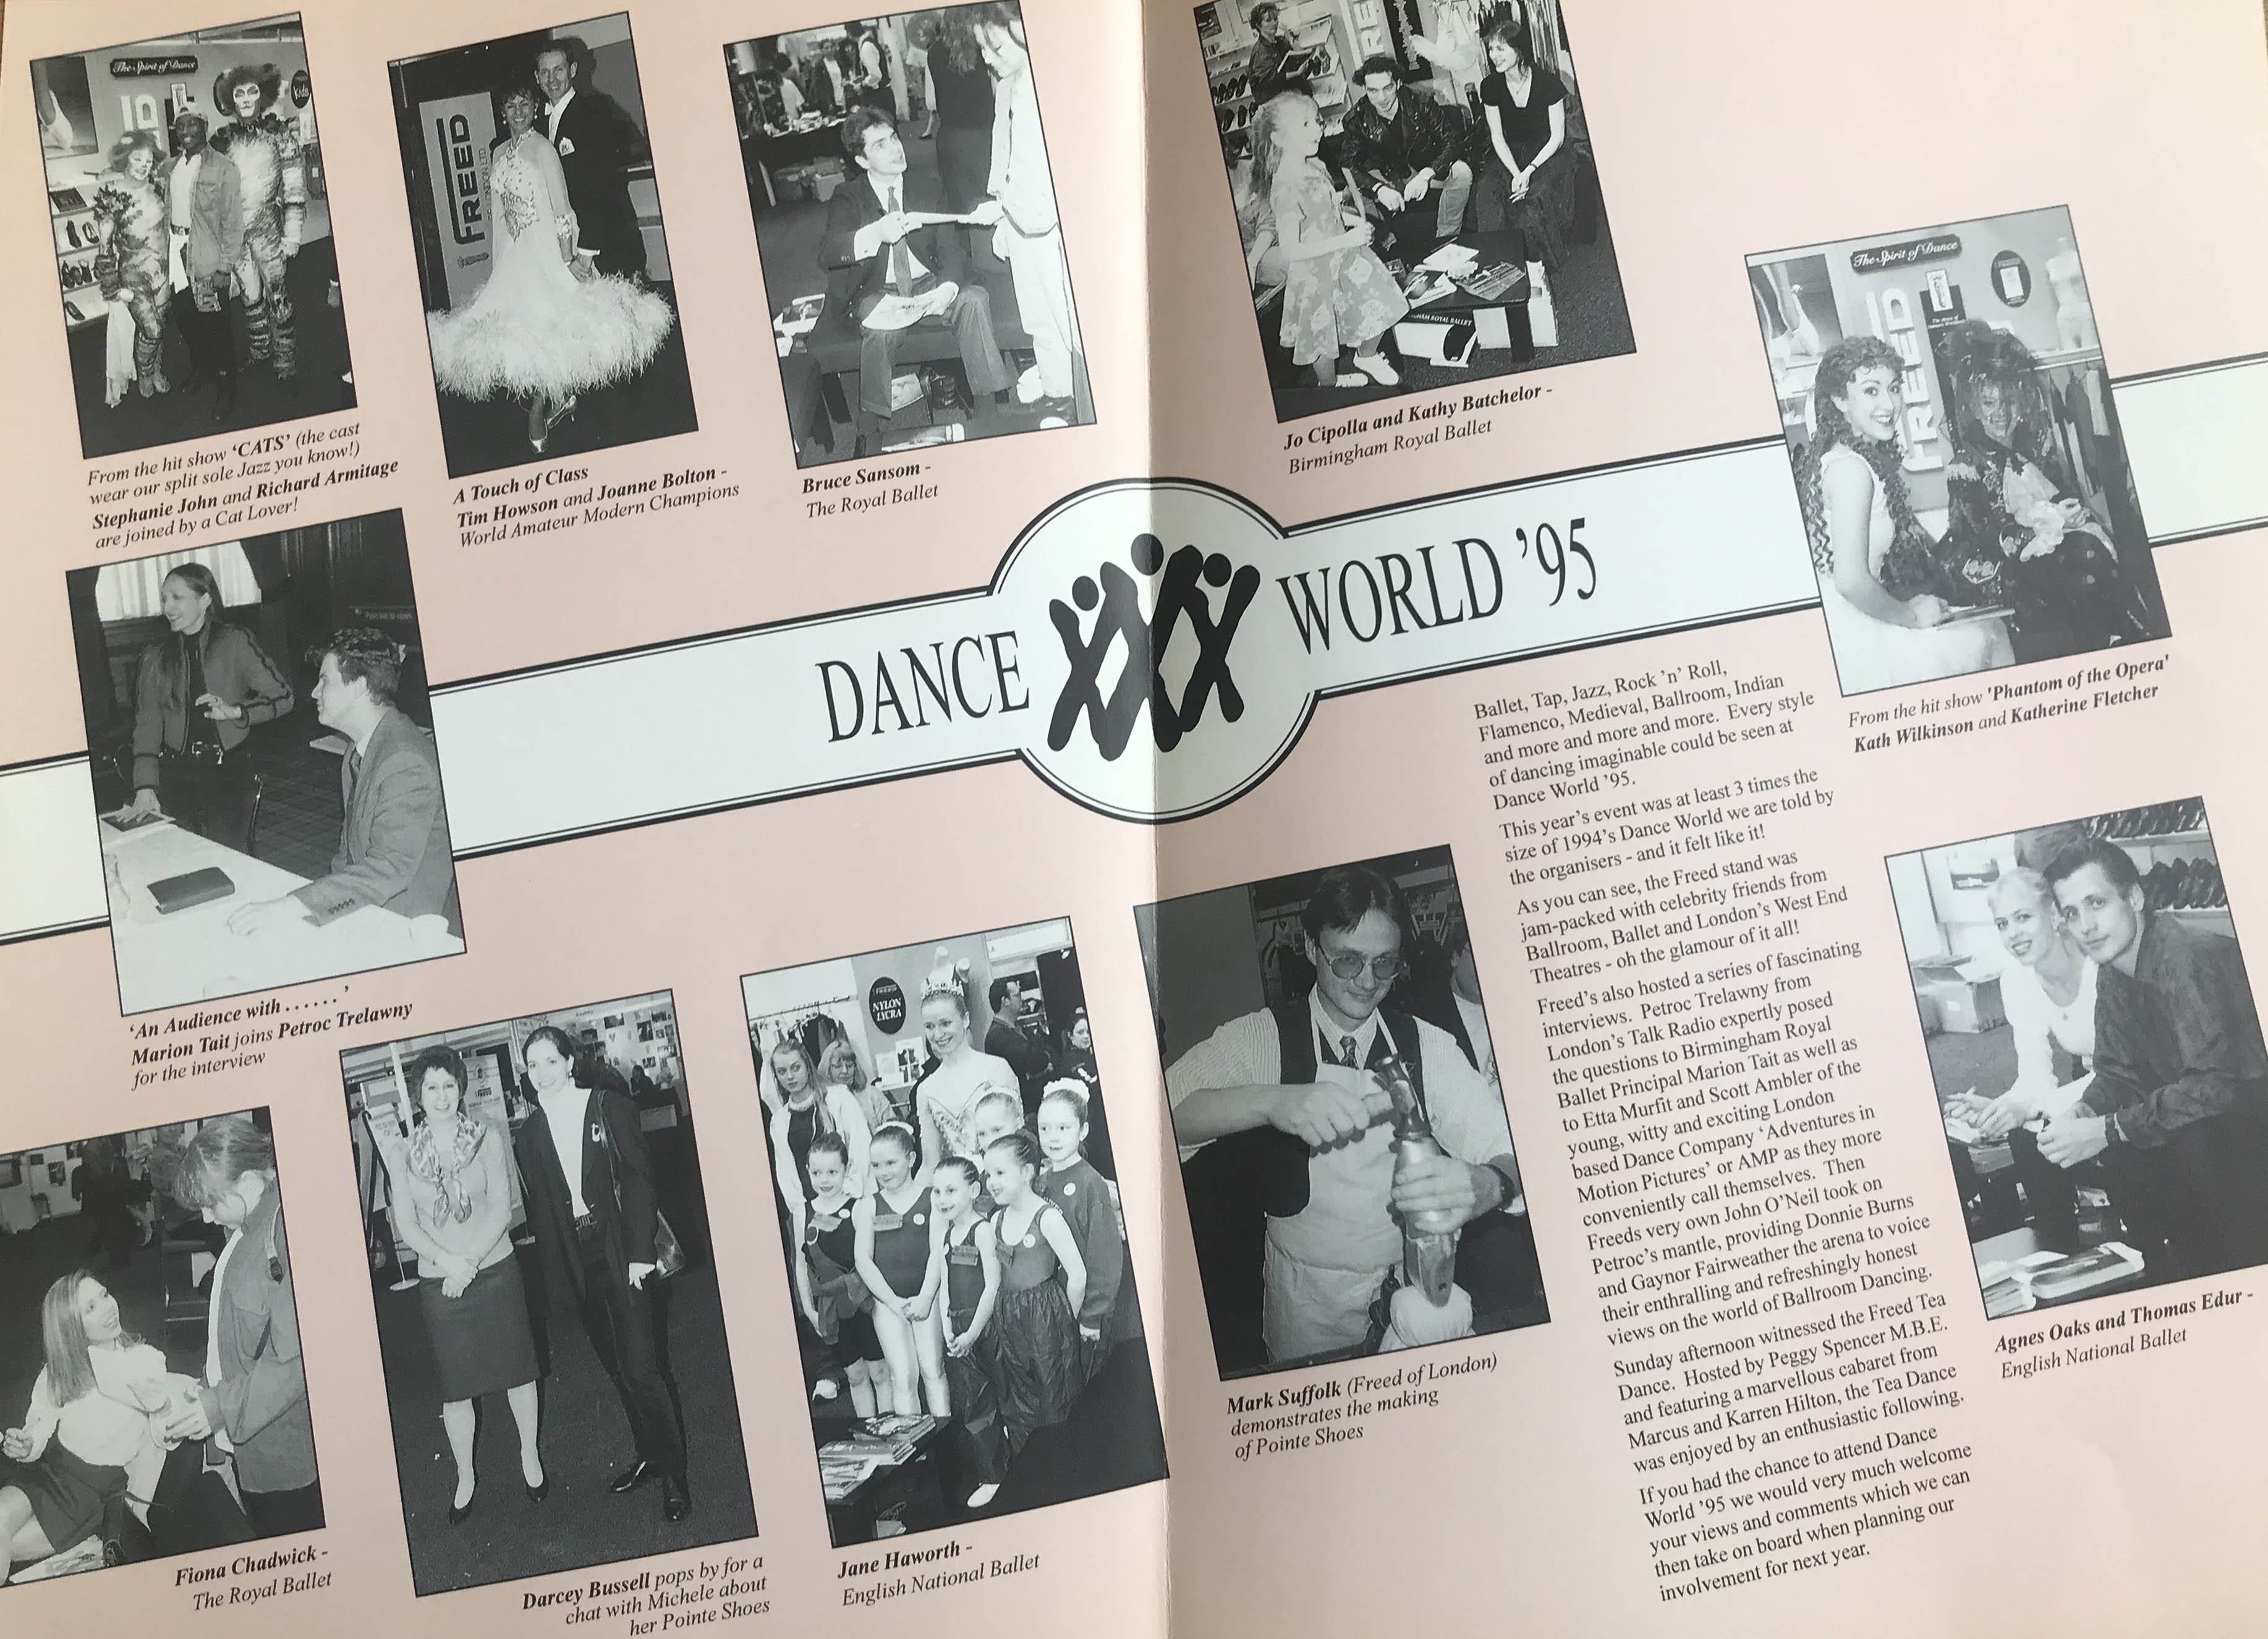 The other is a double-page spread from the Summer 1995 edition of 'Freed News' that shows what has been going on in the dance world in 1995. You can see pictures of Dary Bussell visitin